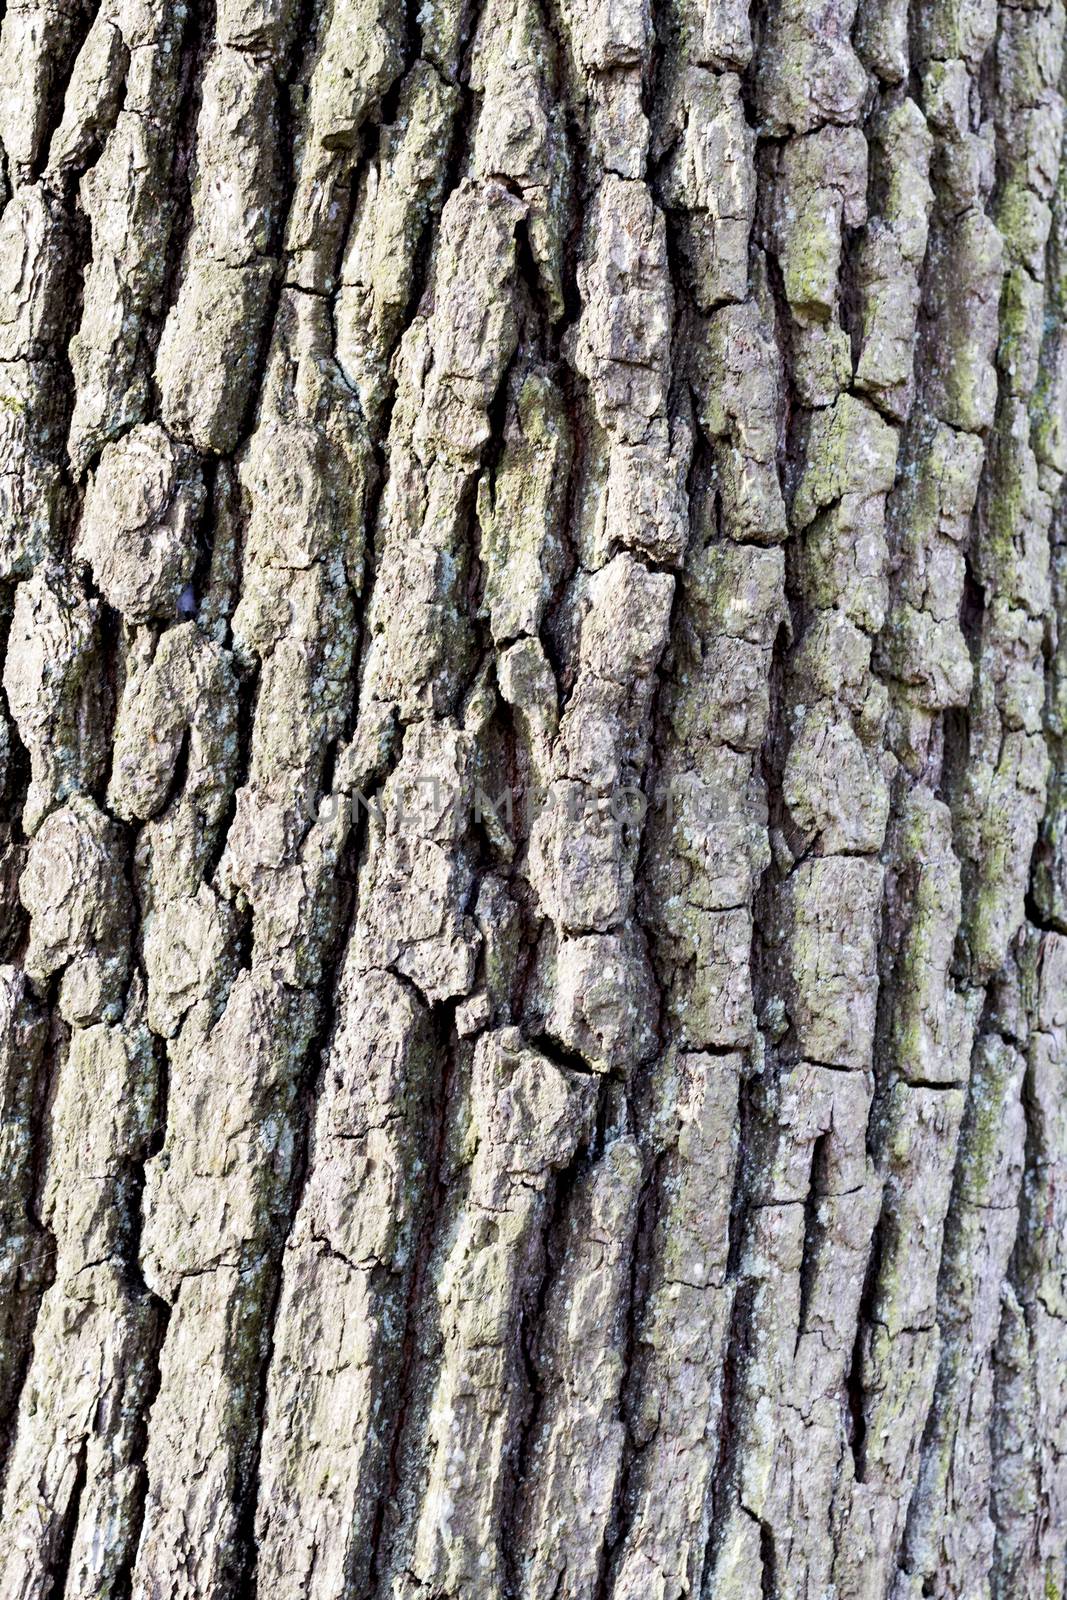 Brown Bark of Tree, Natural Pattern by gewoldi